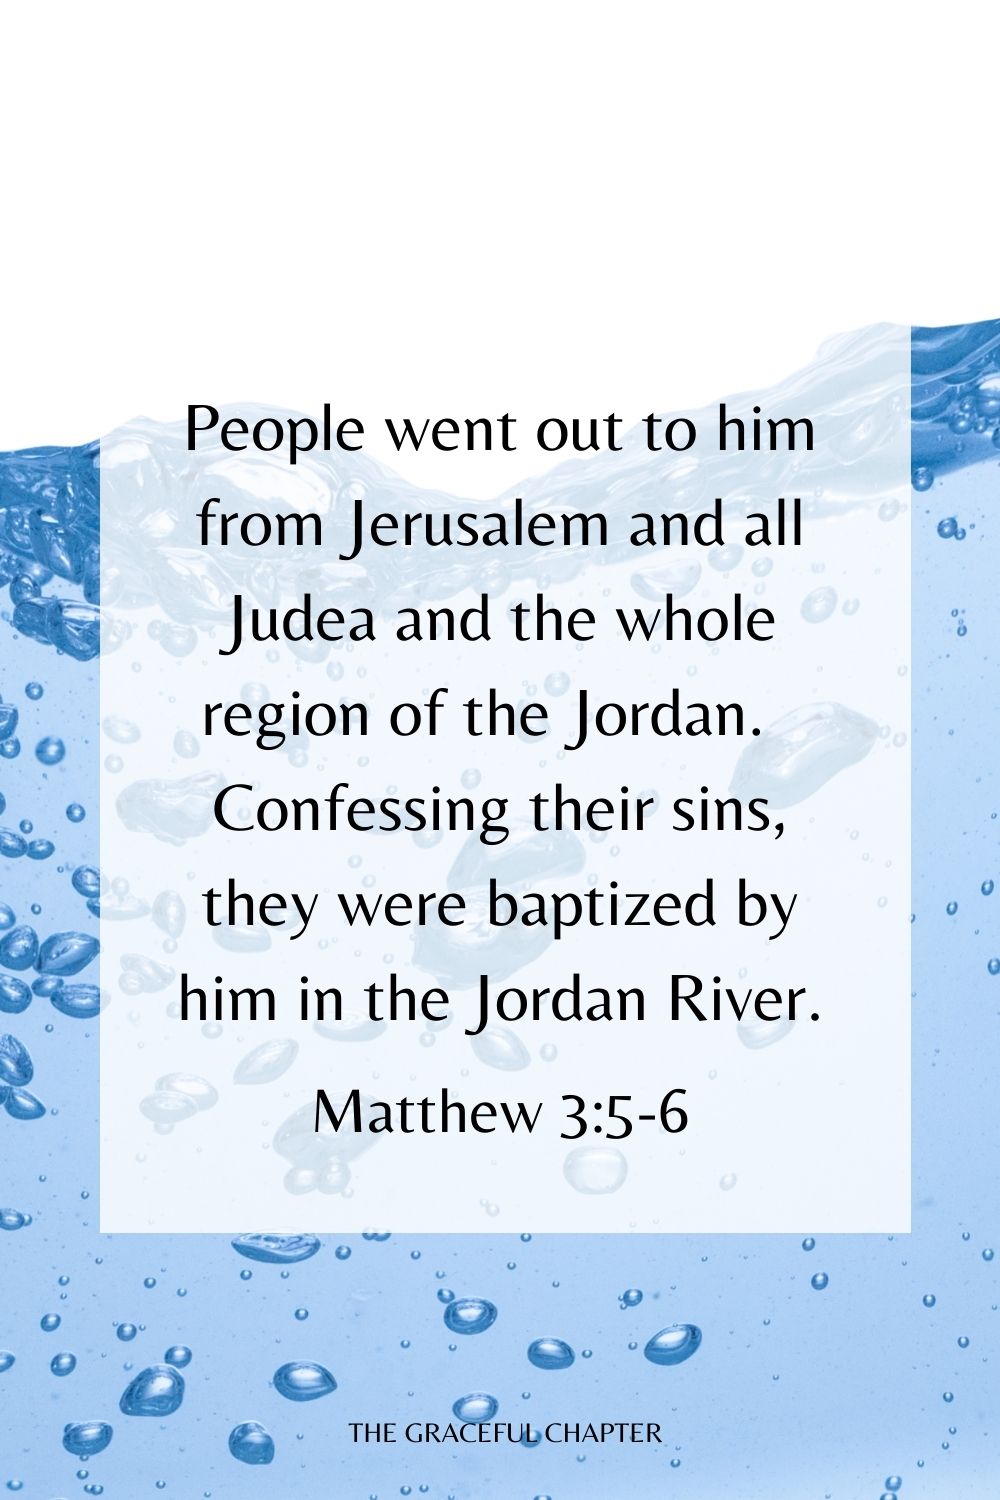 People went out to him from Jerusalem and all Judea and the whole region of the Jordan.  Confessing their sins, they were baptized by him in the Jordan River. Matthew 3:5-6